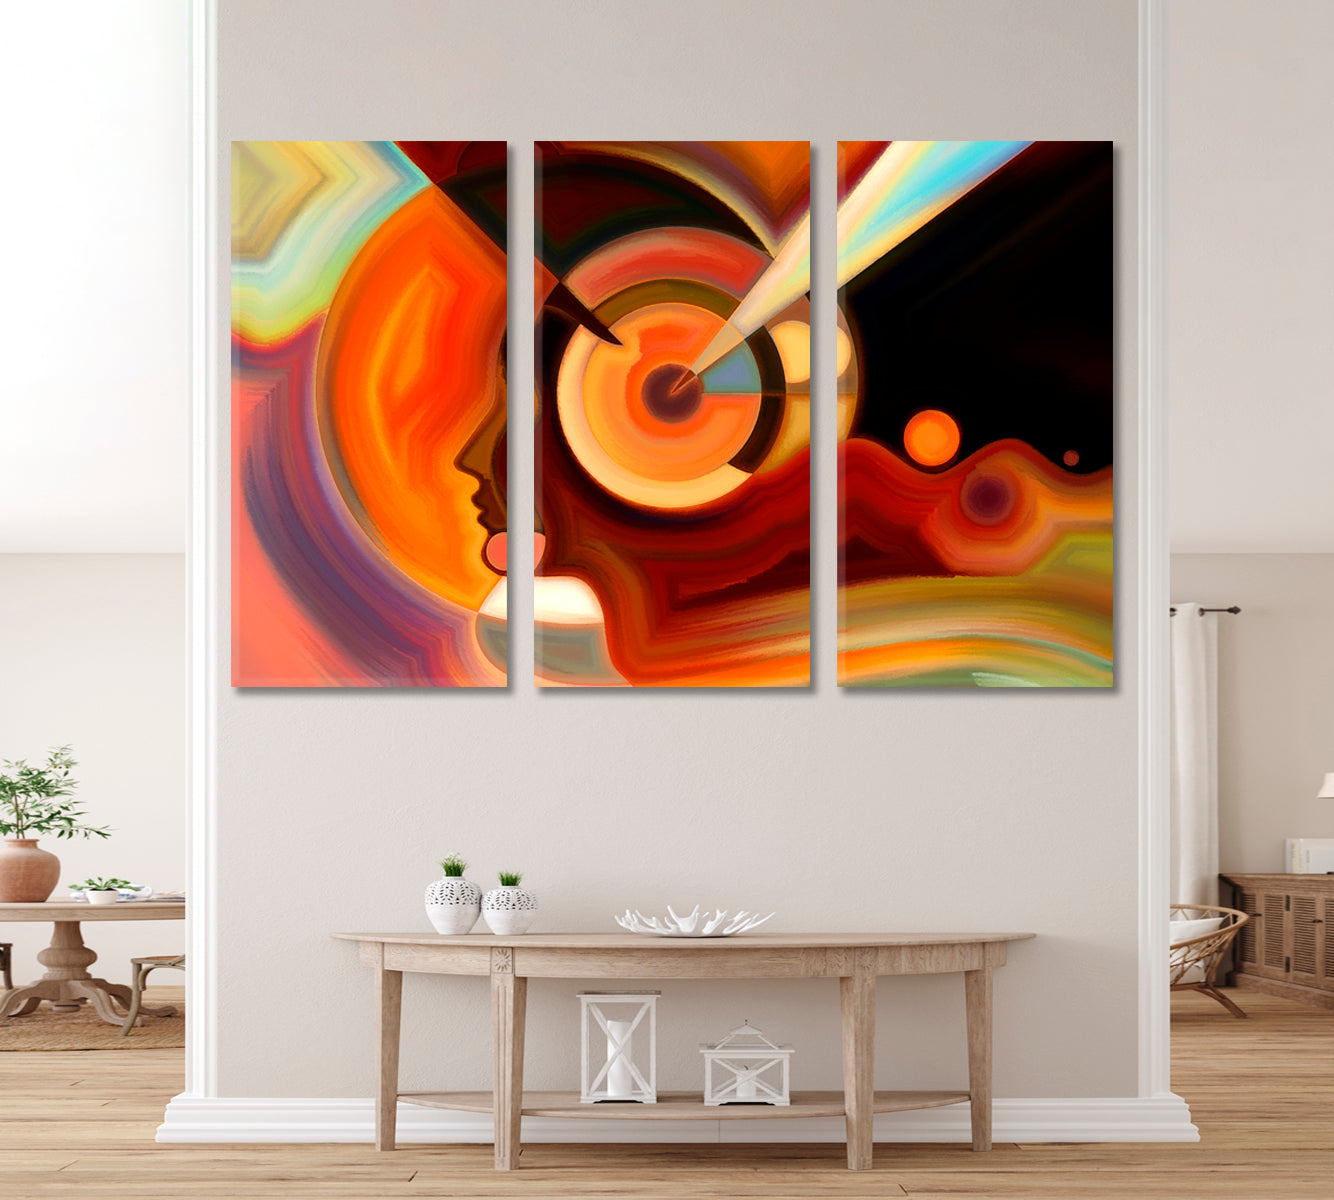 Colors in Mind Artistic Abstract Design Contemporary Art Artesty 3 panels 36" x 24" 